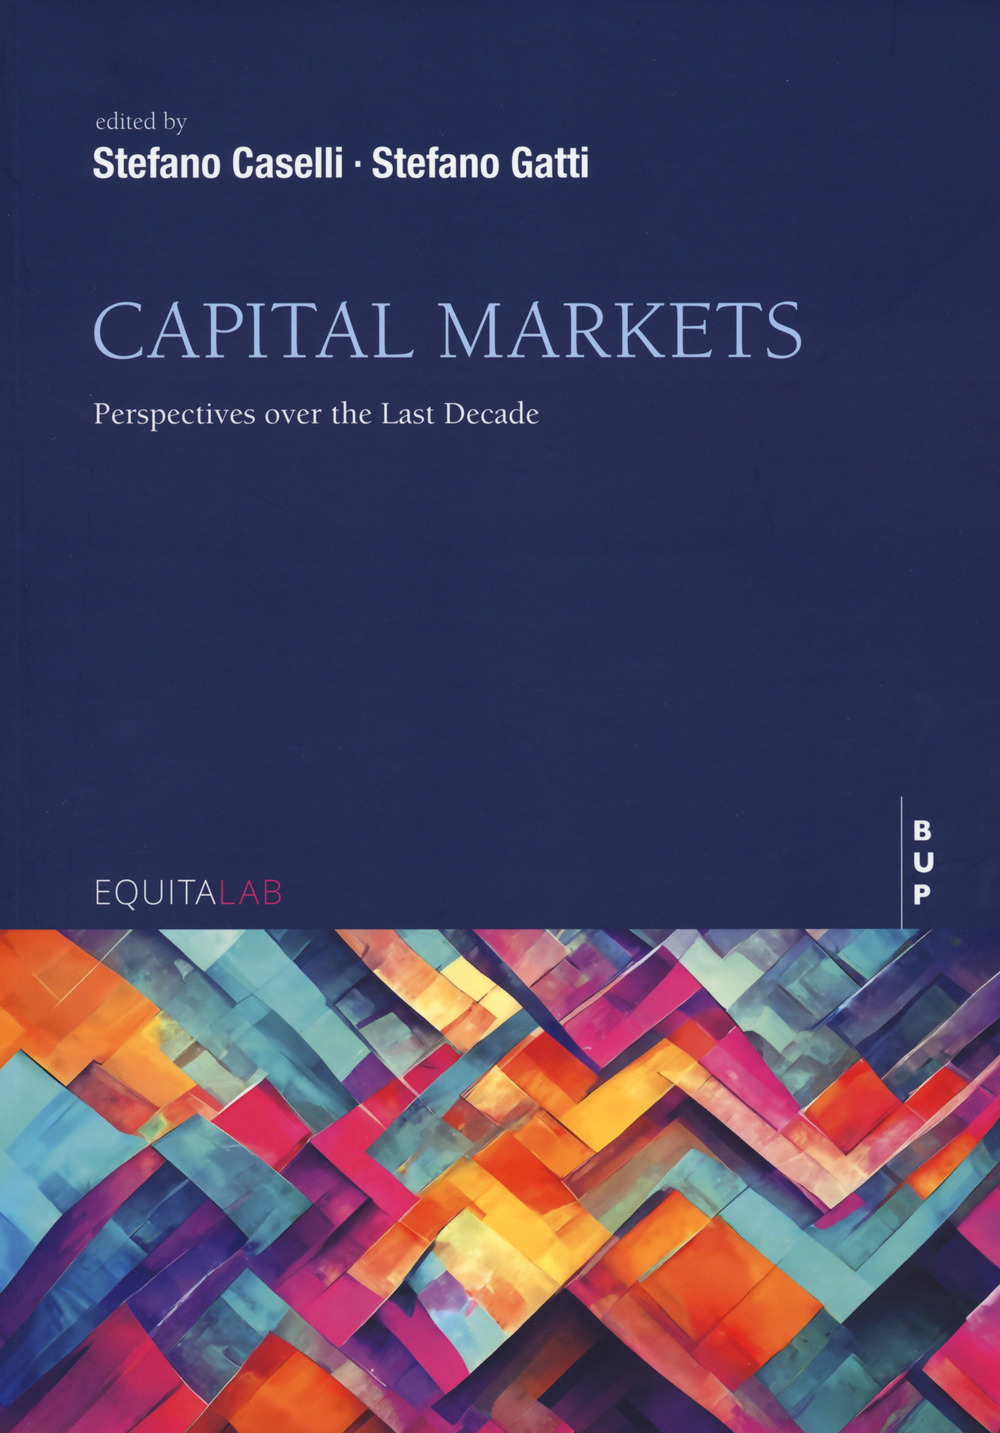 Capital markets. Perspettives over the last decade